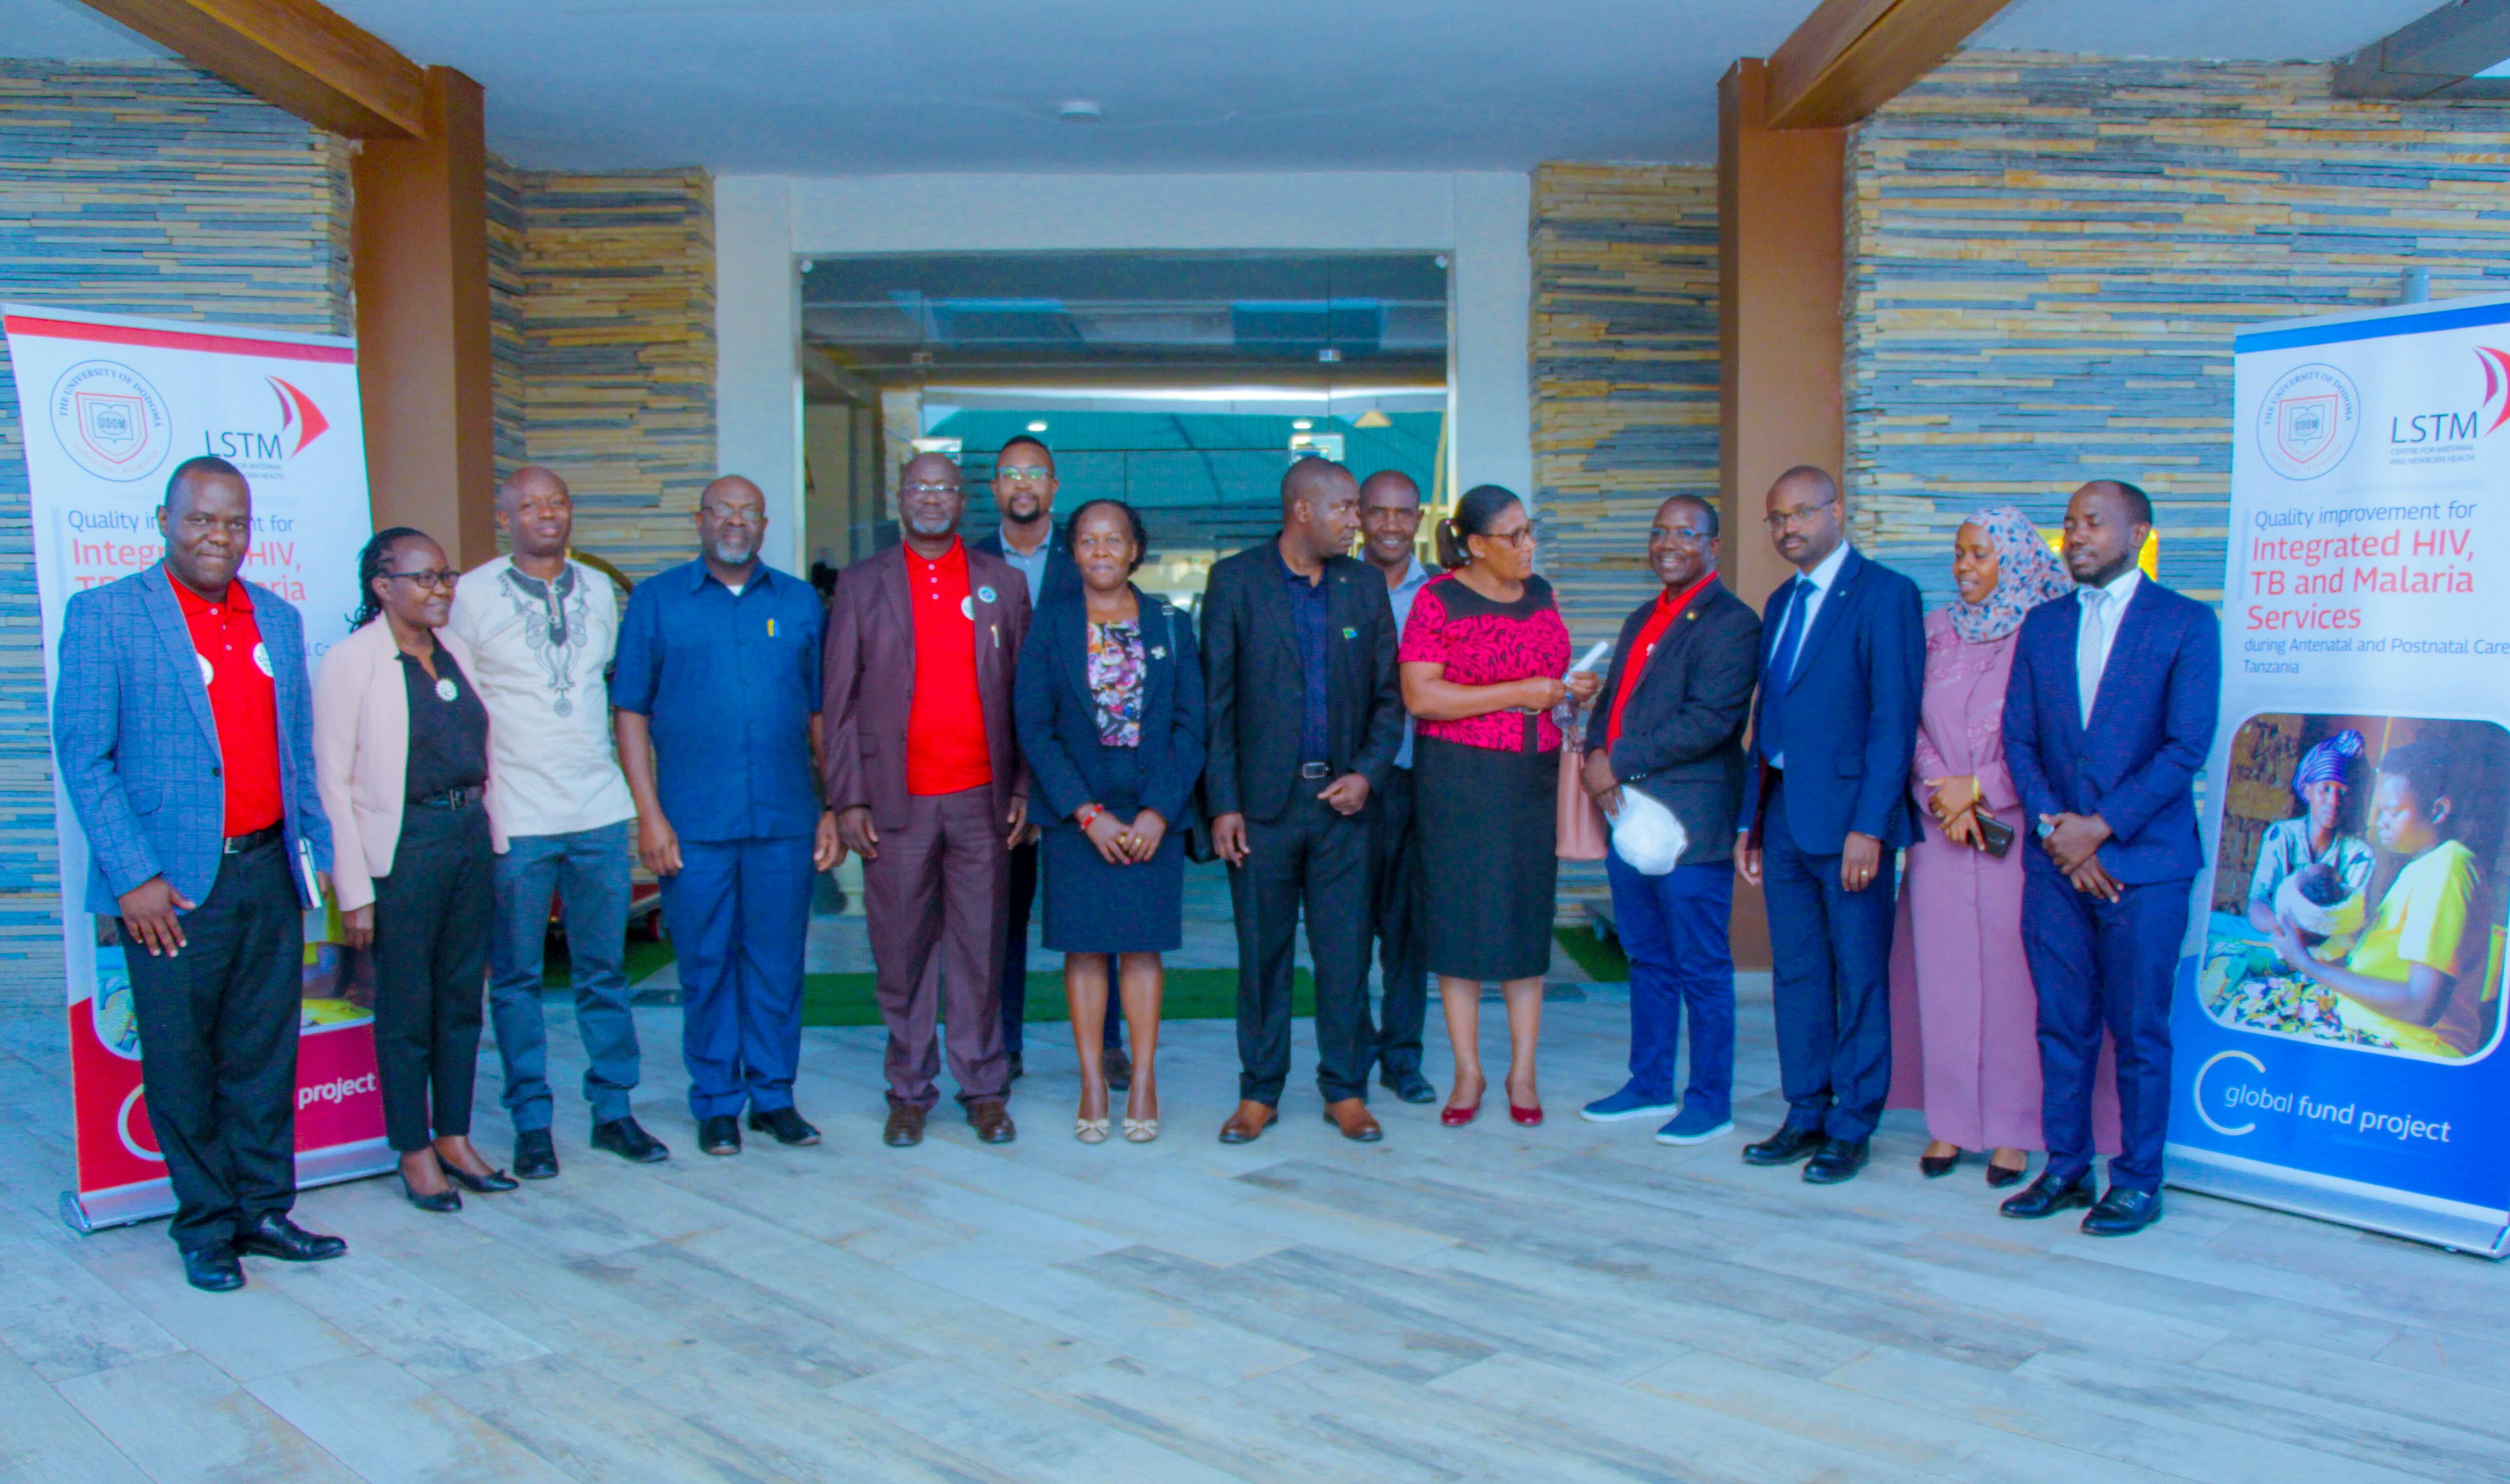 The organizing committee along with the guests at the official launching of the UDOM/LSTM project aiming at Quality Improvement for Integrated HIV, TB, and Malaria services during Antenatal and Postnatal Care, Tanzania